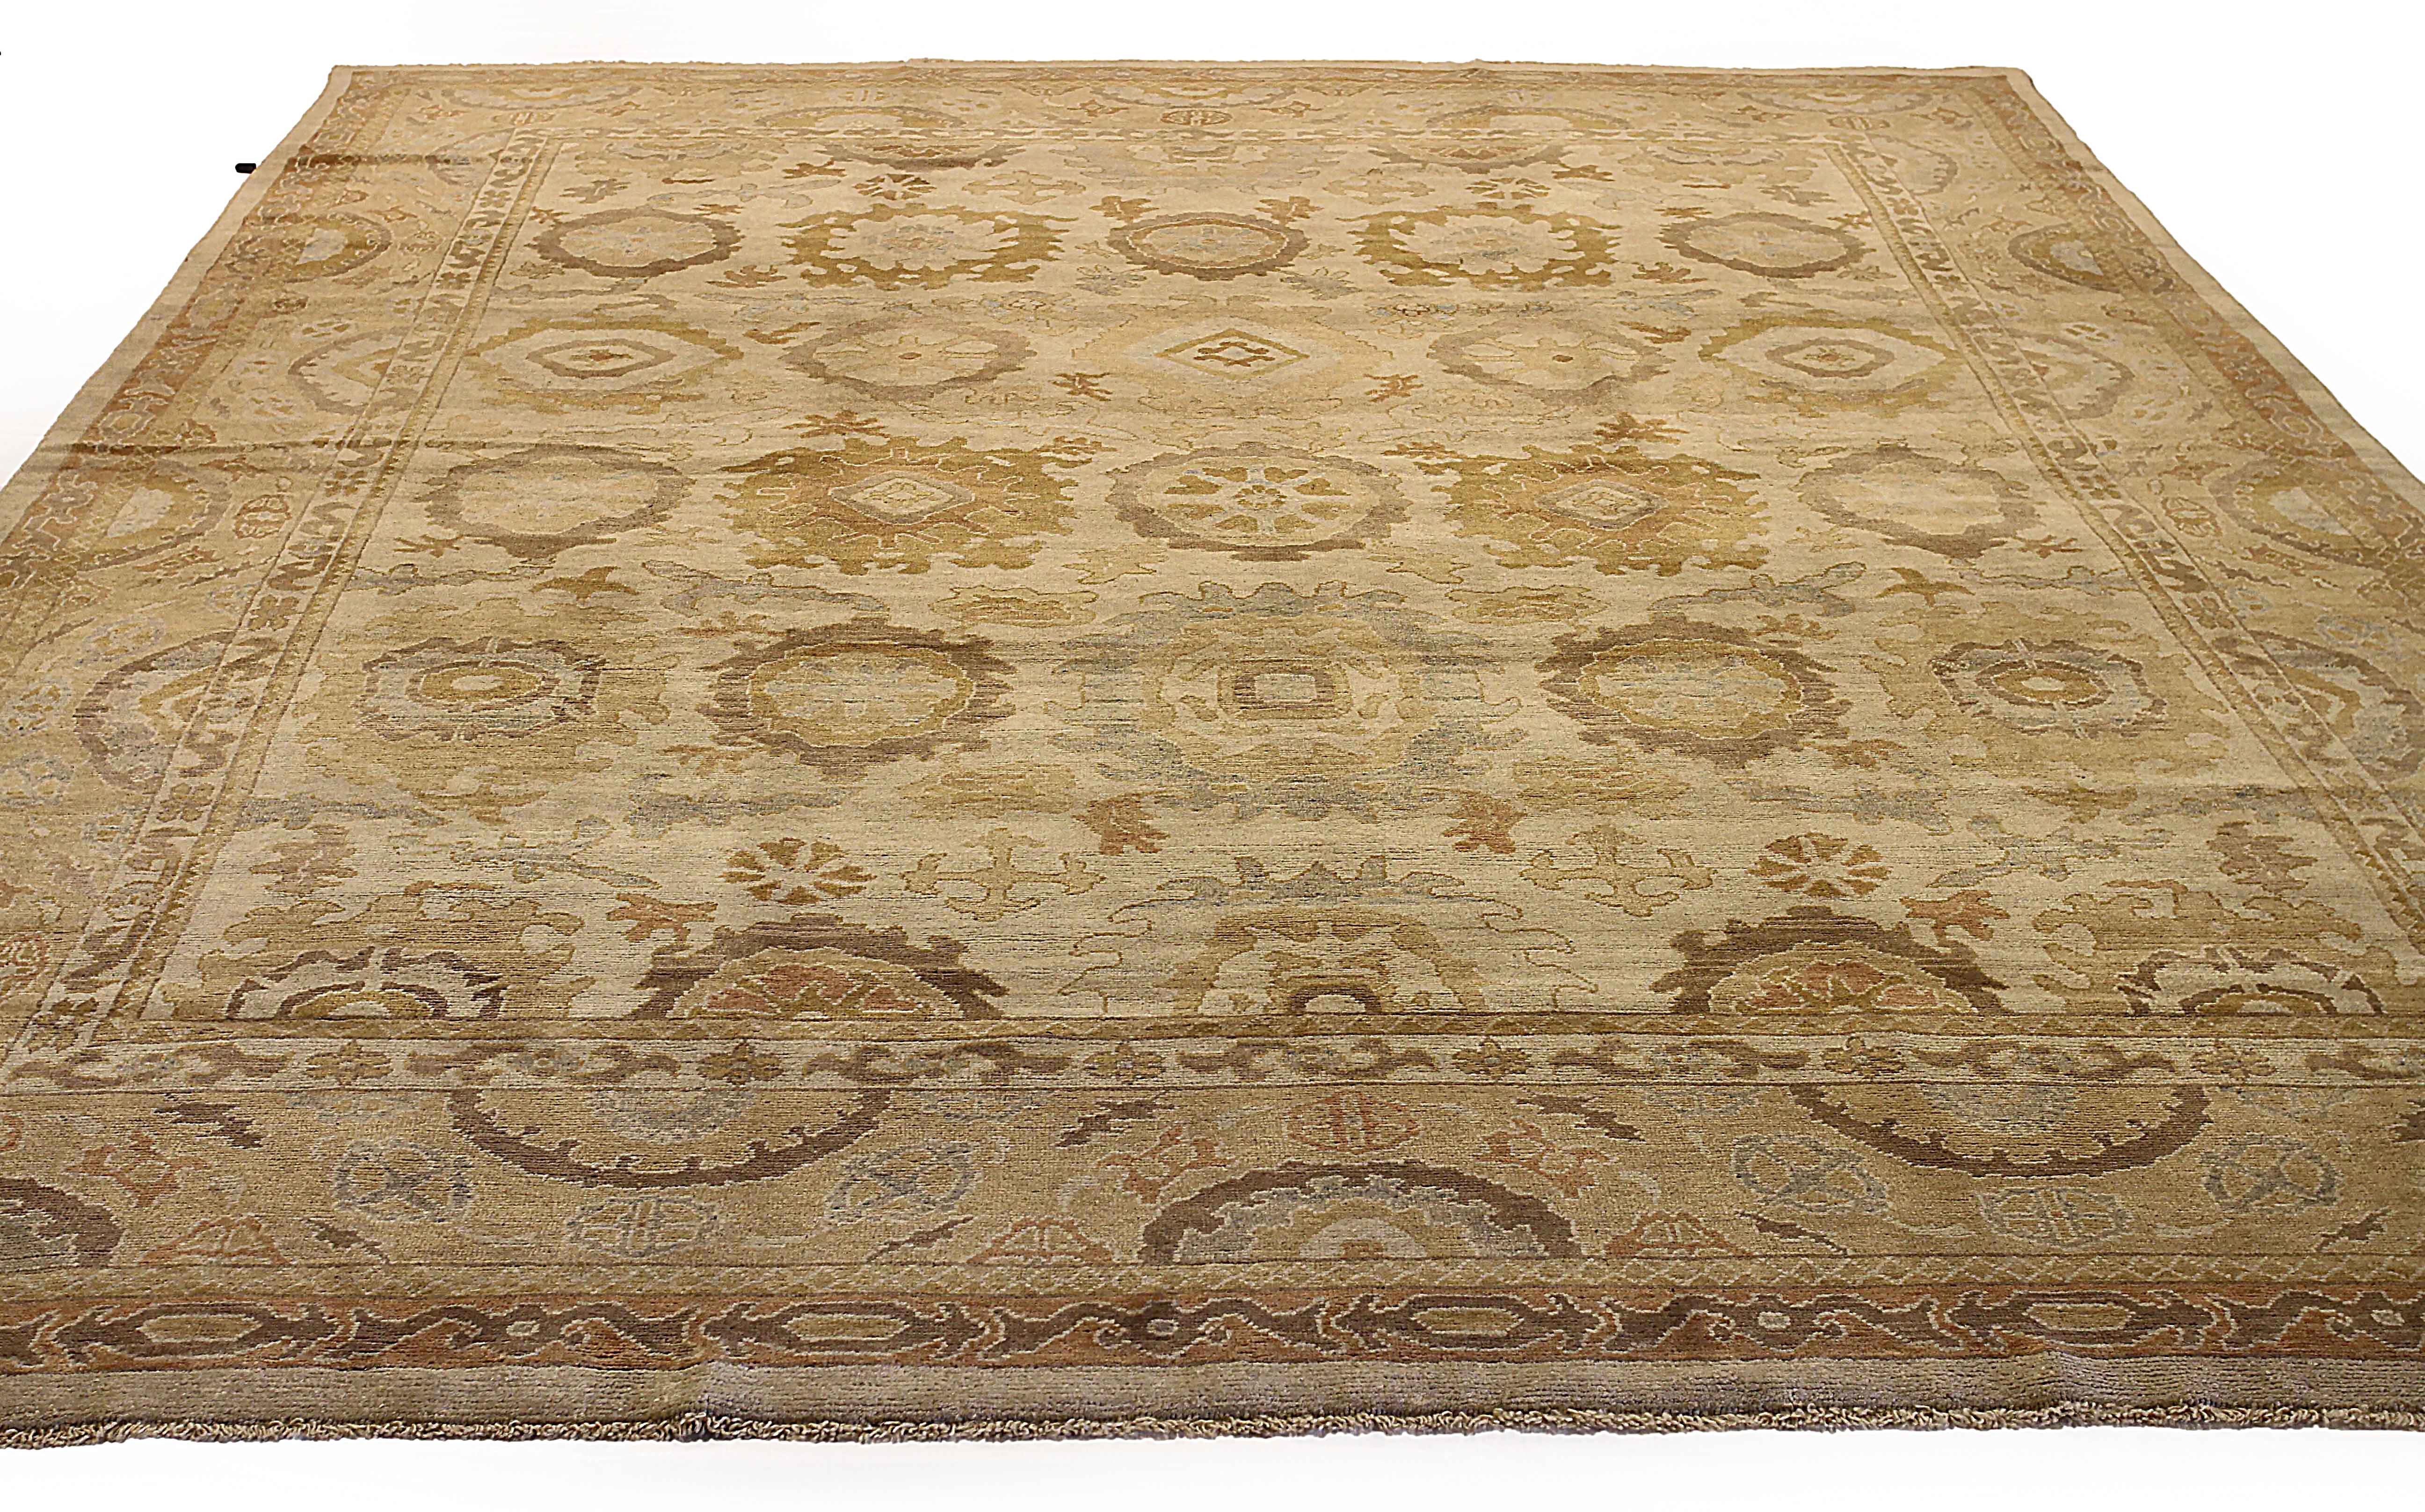 Antique handmade Turkish area rug from high quality sheep’s wool and colored with eco-friendly vegetable dyes that are proven safe for humans and pets alike. It’s a classic Oushak design showcasing a regal brown and blue  field with prominent Herati